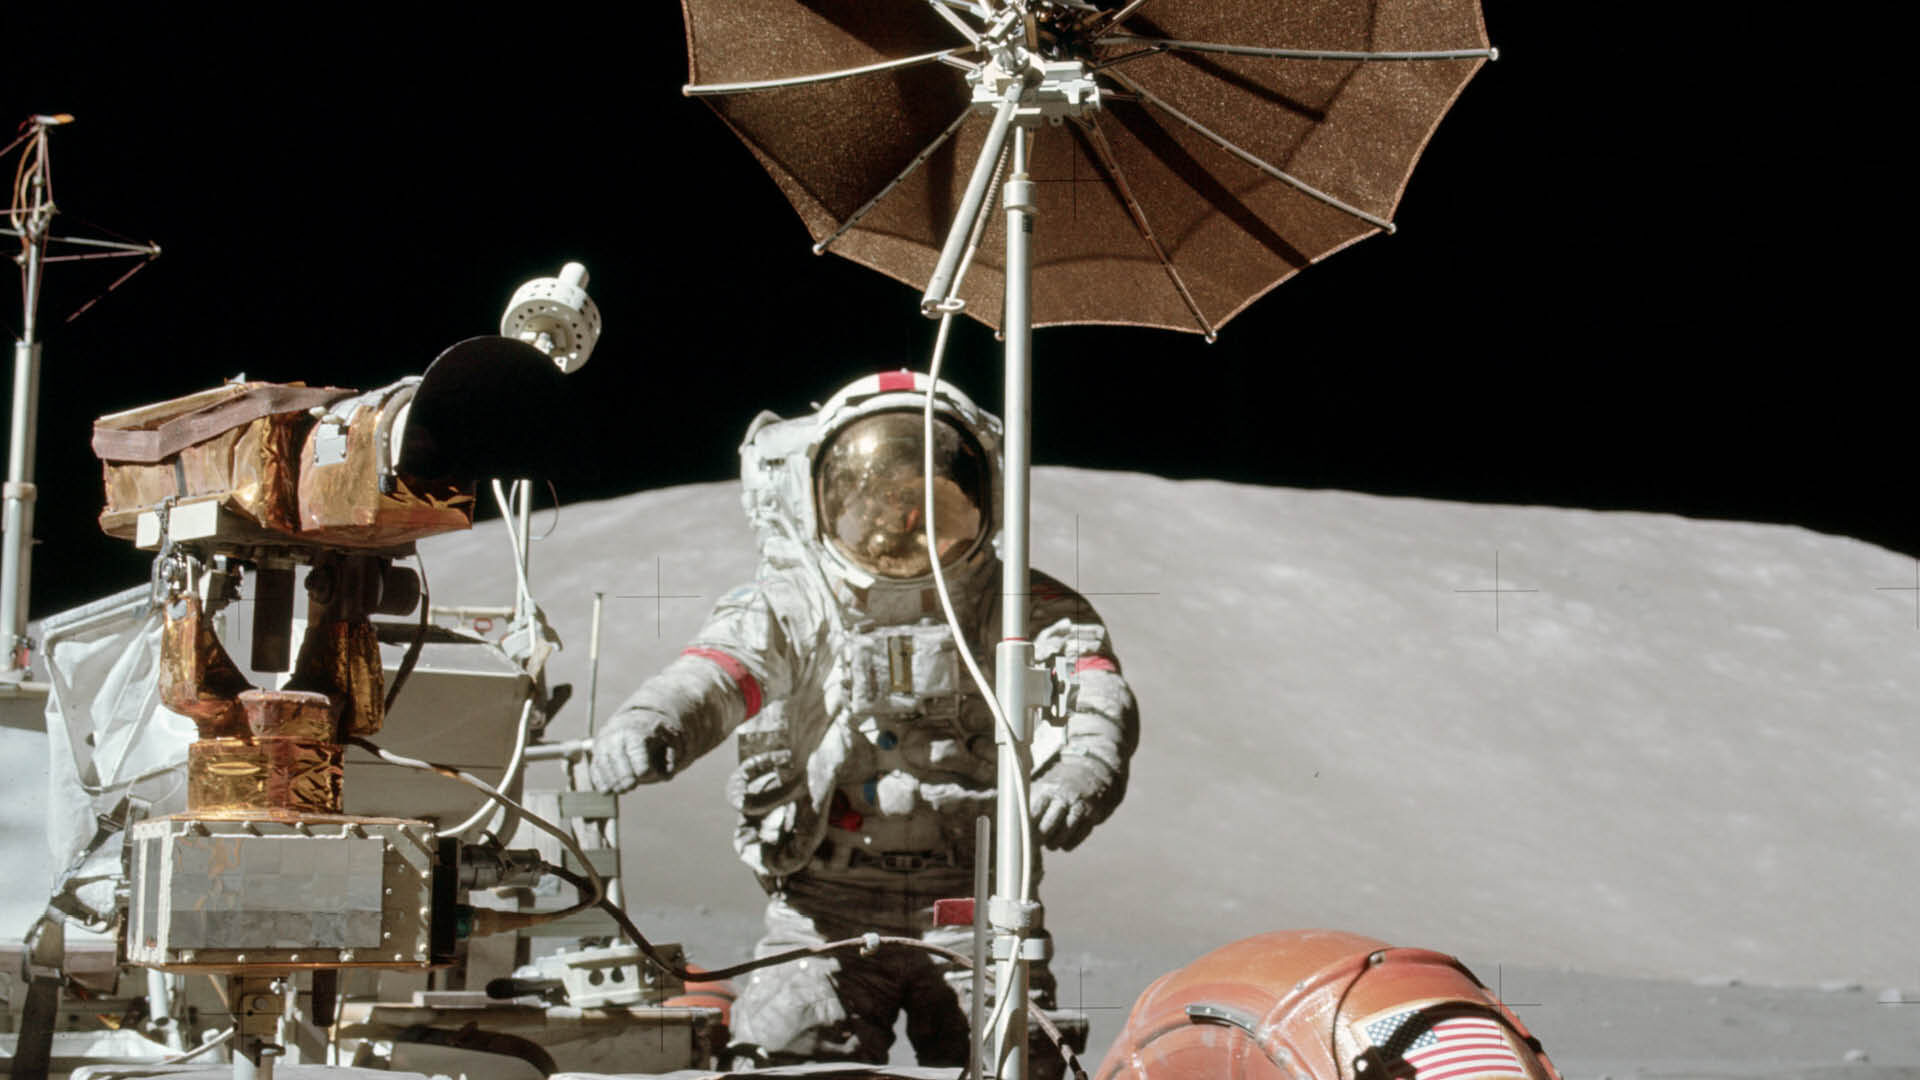 Eugene Cernan and the lunar rover on the lunar surface during Apollo 17.